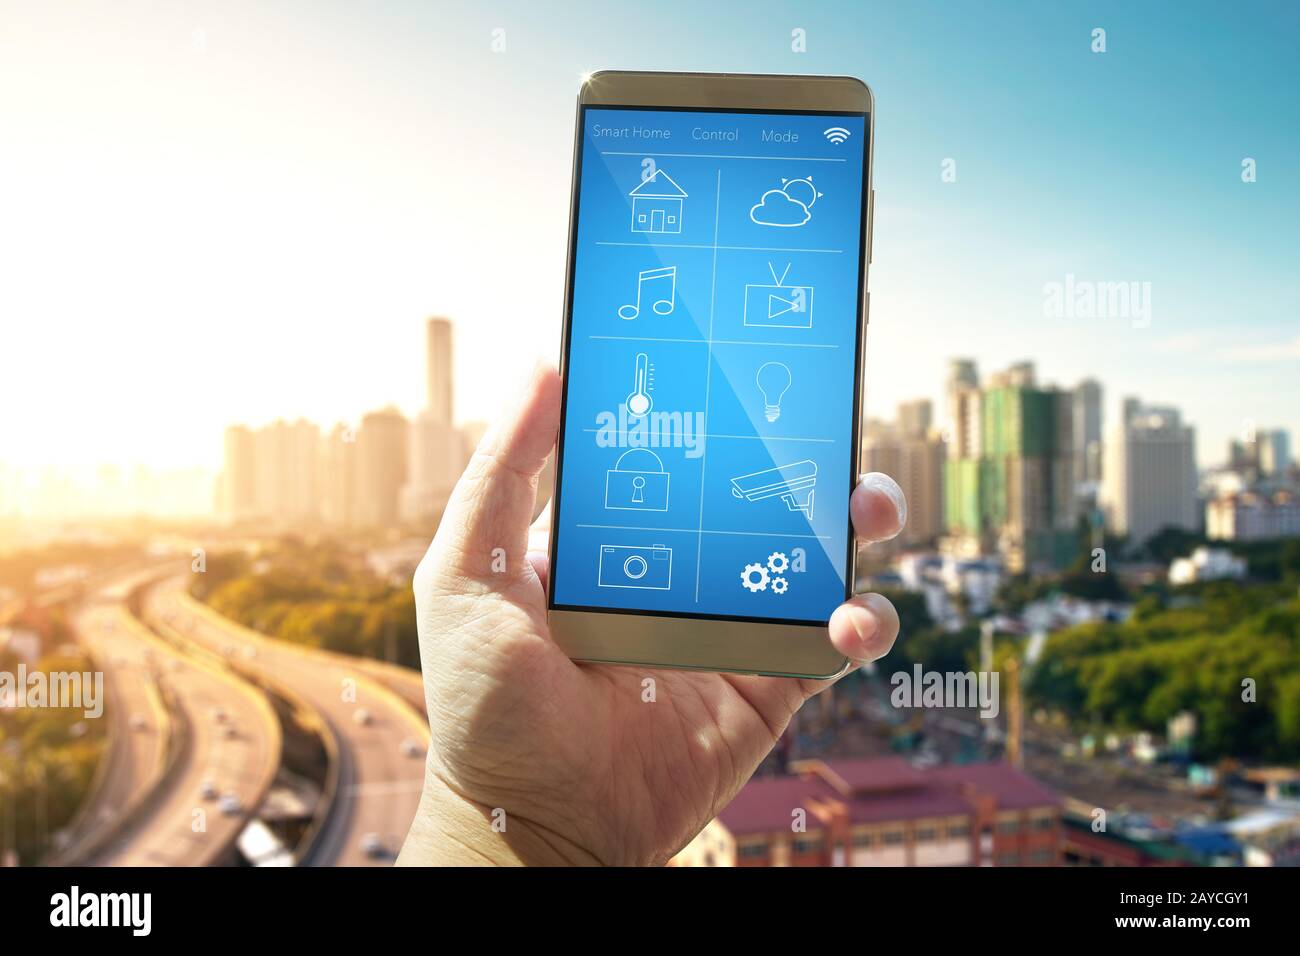 Smart remote home control system apps on a hand phone with out of focus cityscape background. Stock Photo